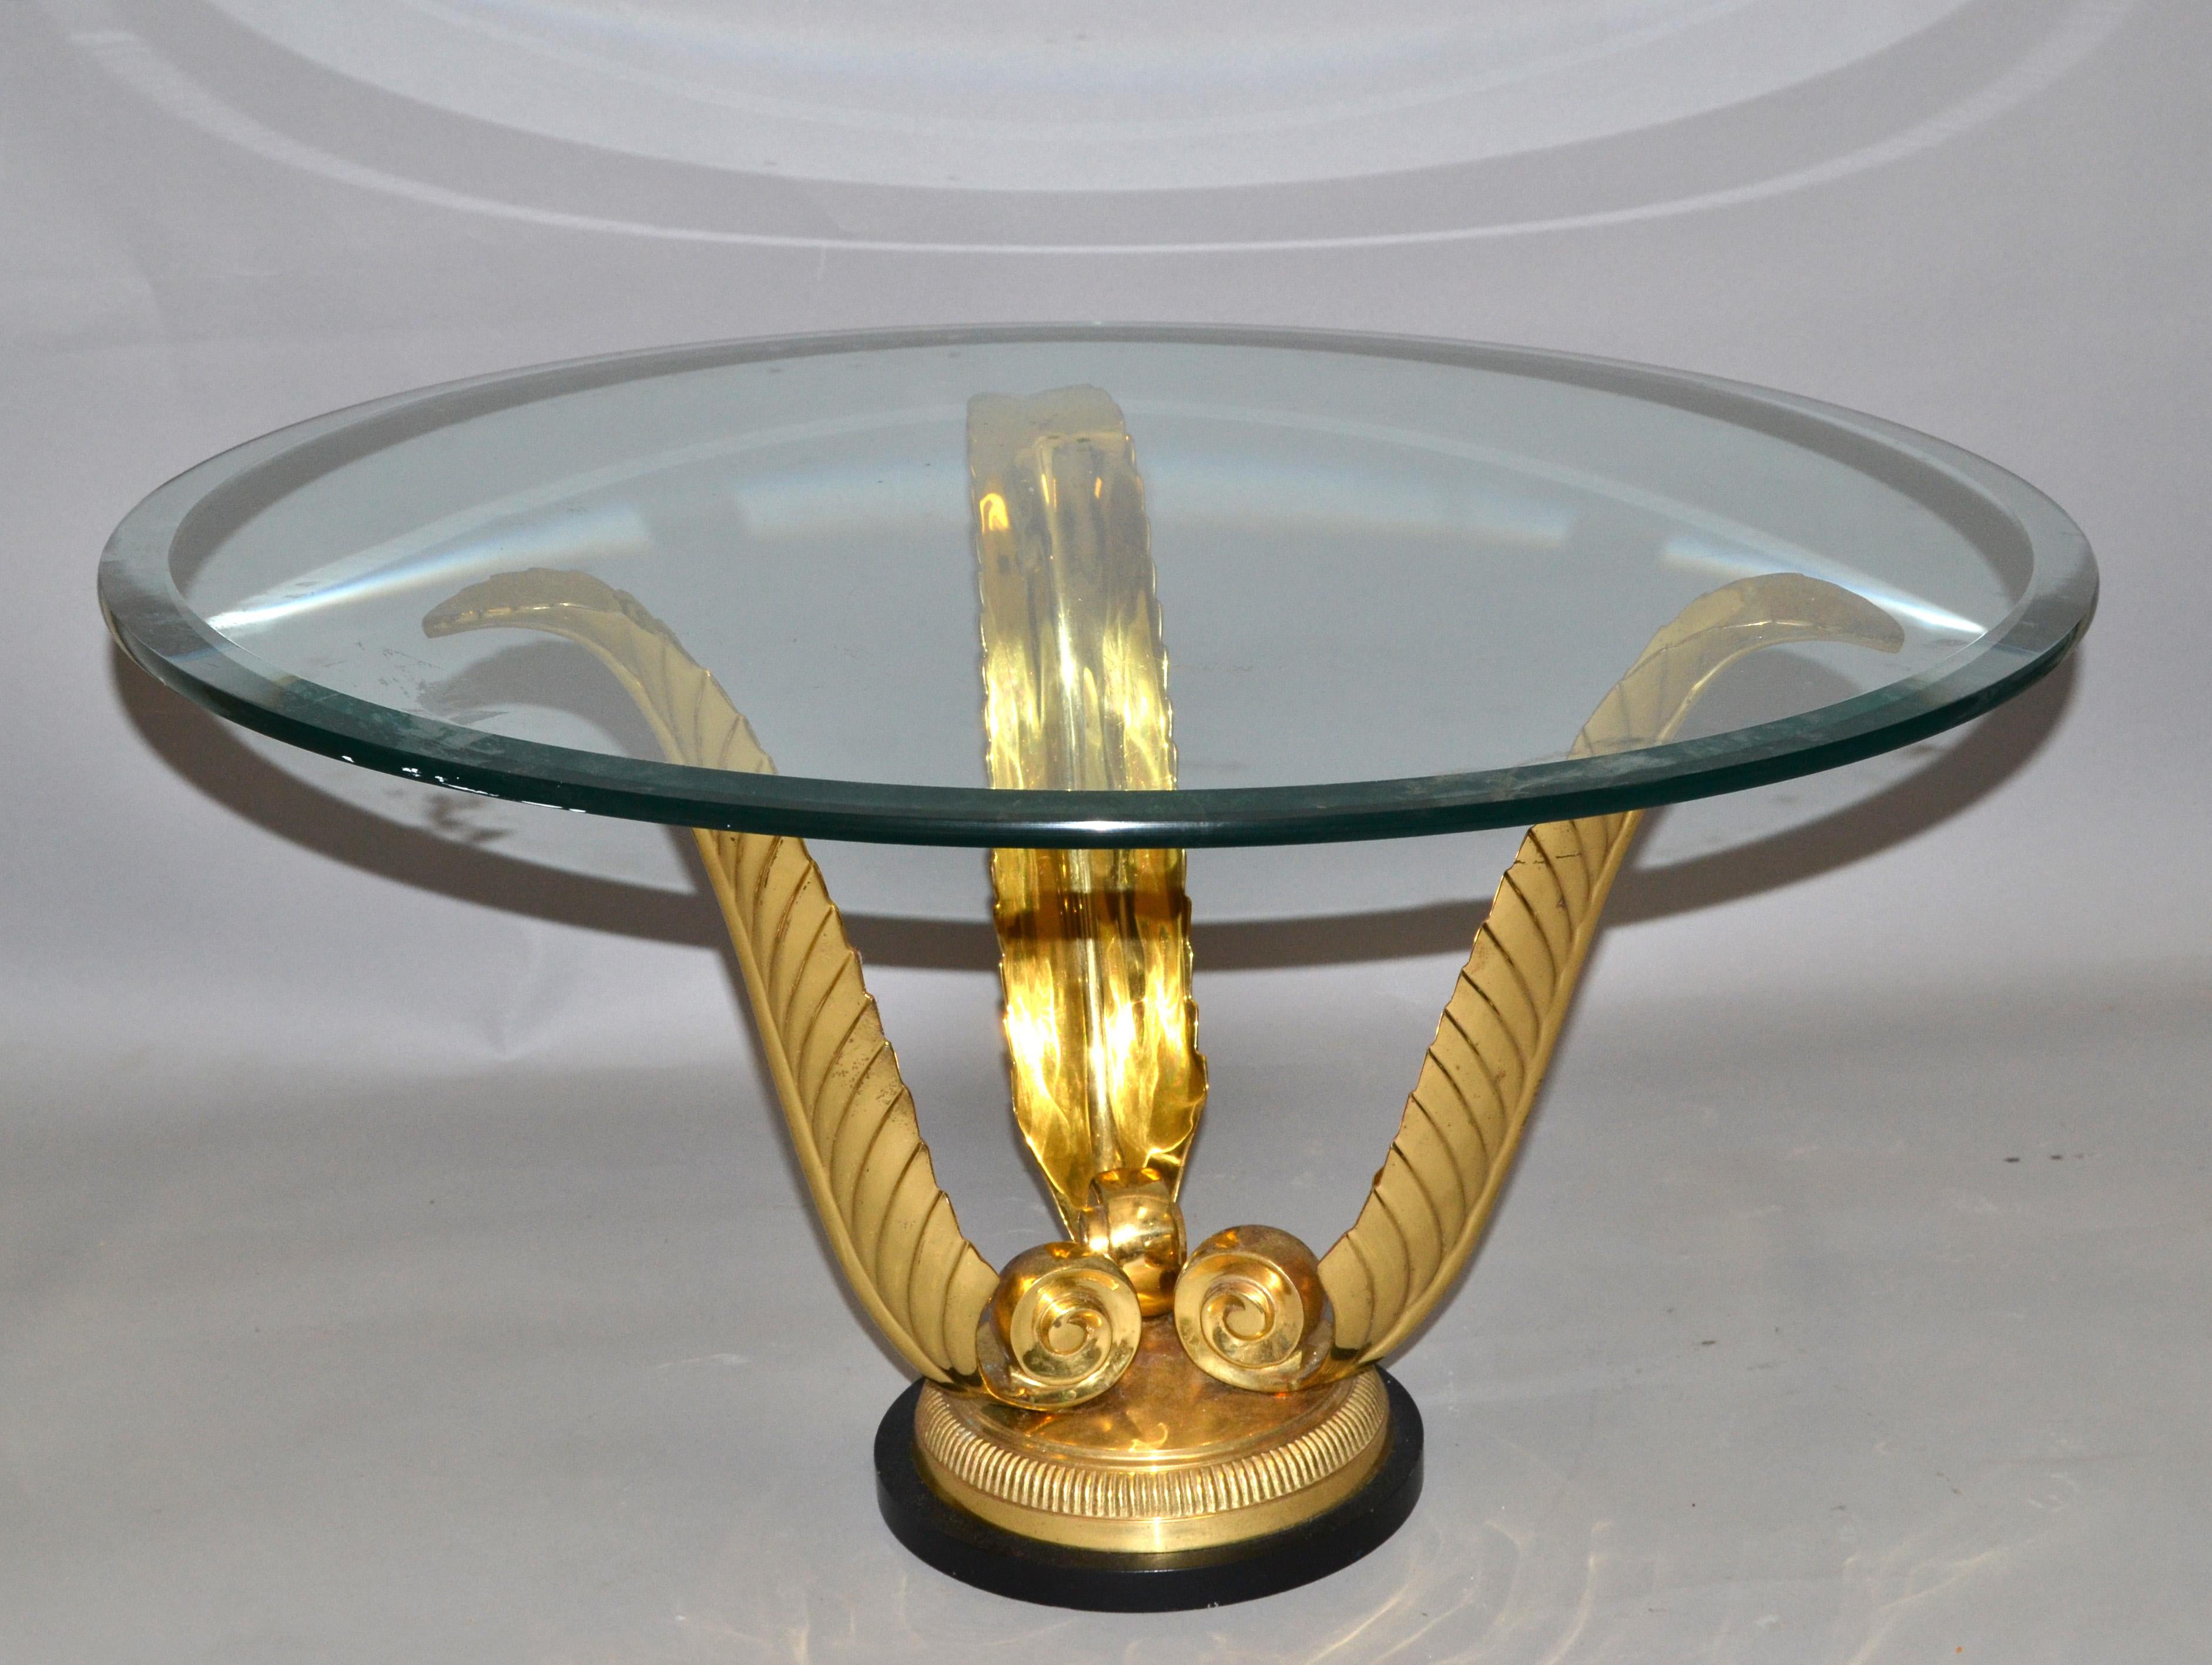 20th Century Bronze & Steel Agave Coffee Table Base or Figurative Sculpture Italian Regency For Sale